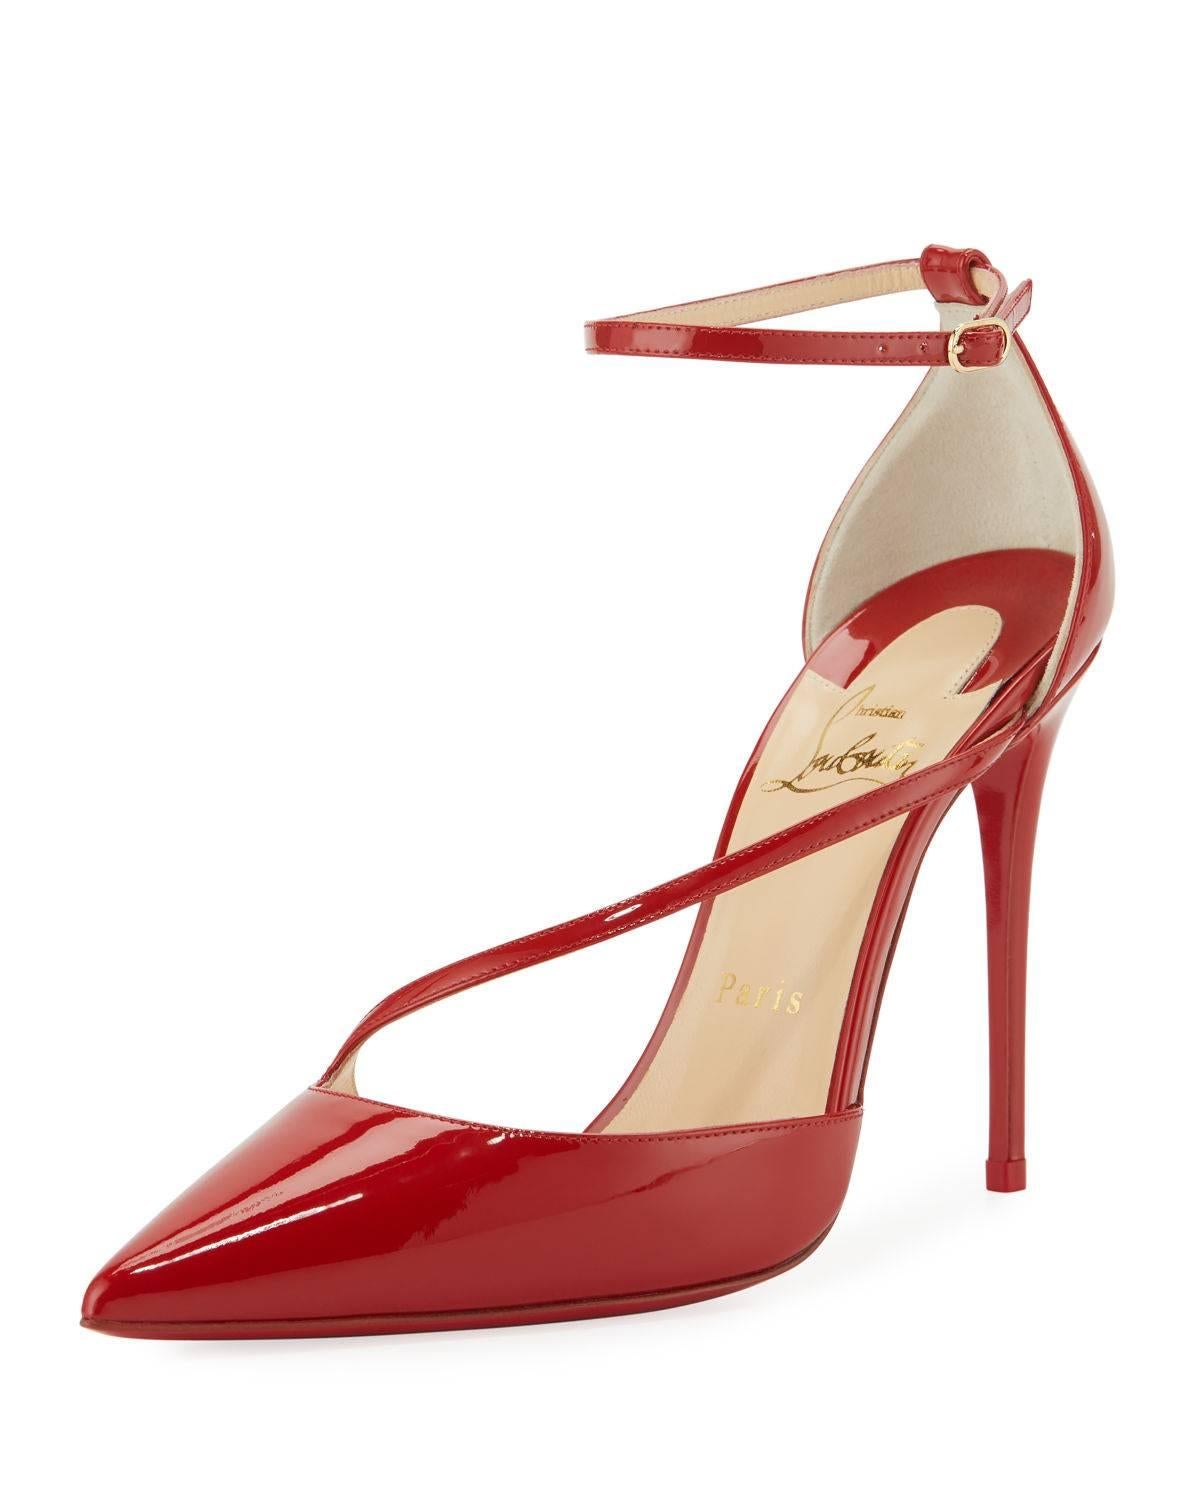 CURATOR'S NOTES  

Christian Louboutin NEW Sold Out Red Patent Criss Cross Evening Heels Pumps in Box  

Size IT 36.5 - Our only pair!
Patent leather 
Ankle buckle closure 
Made in Italy 
Heel height 4" (100mm)
Includes original Christian